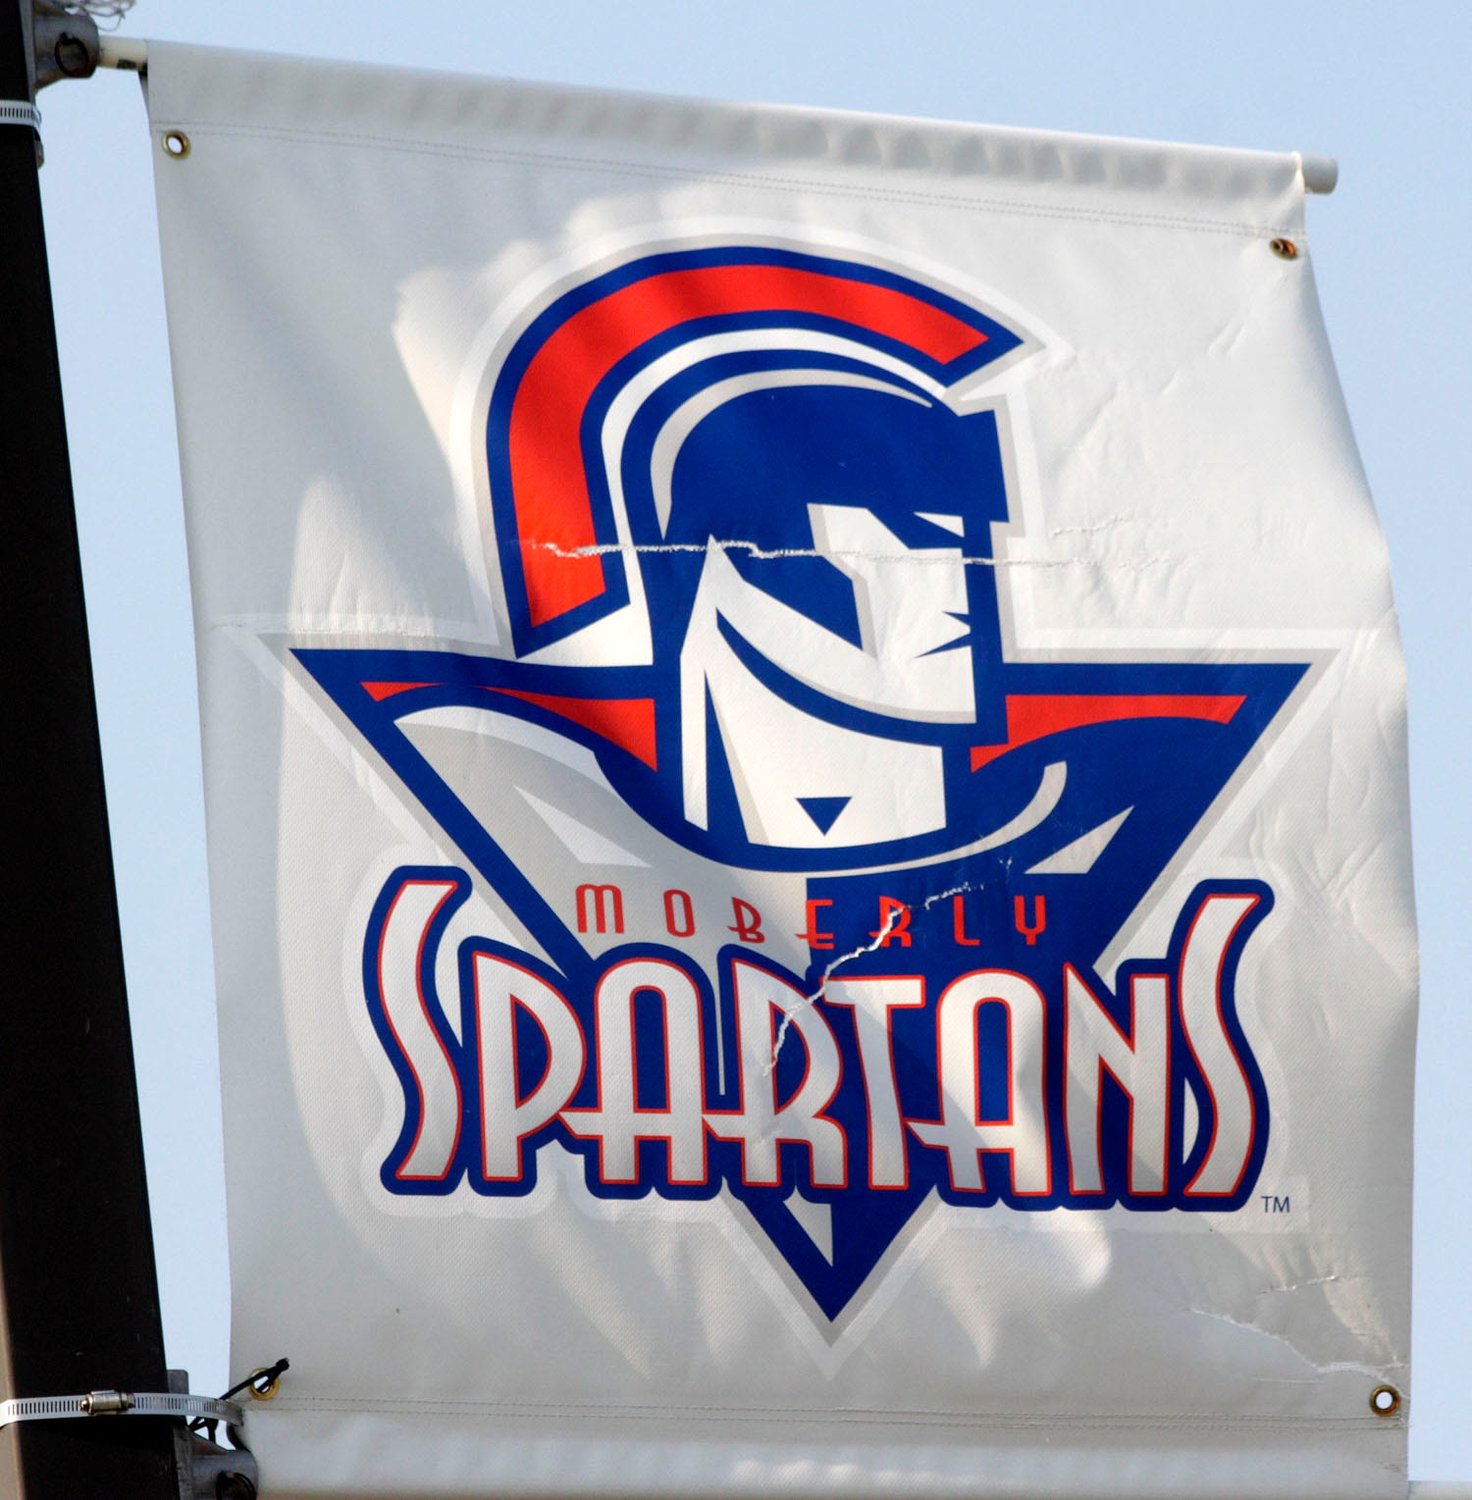 Moberly Spartans banner